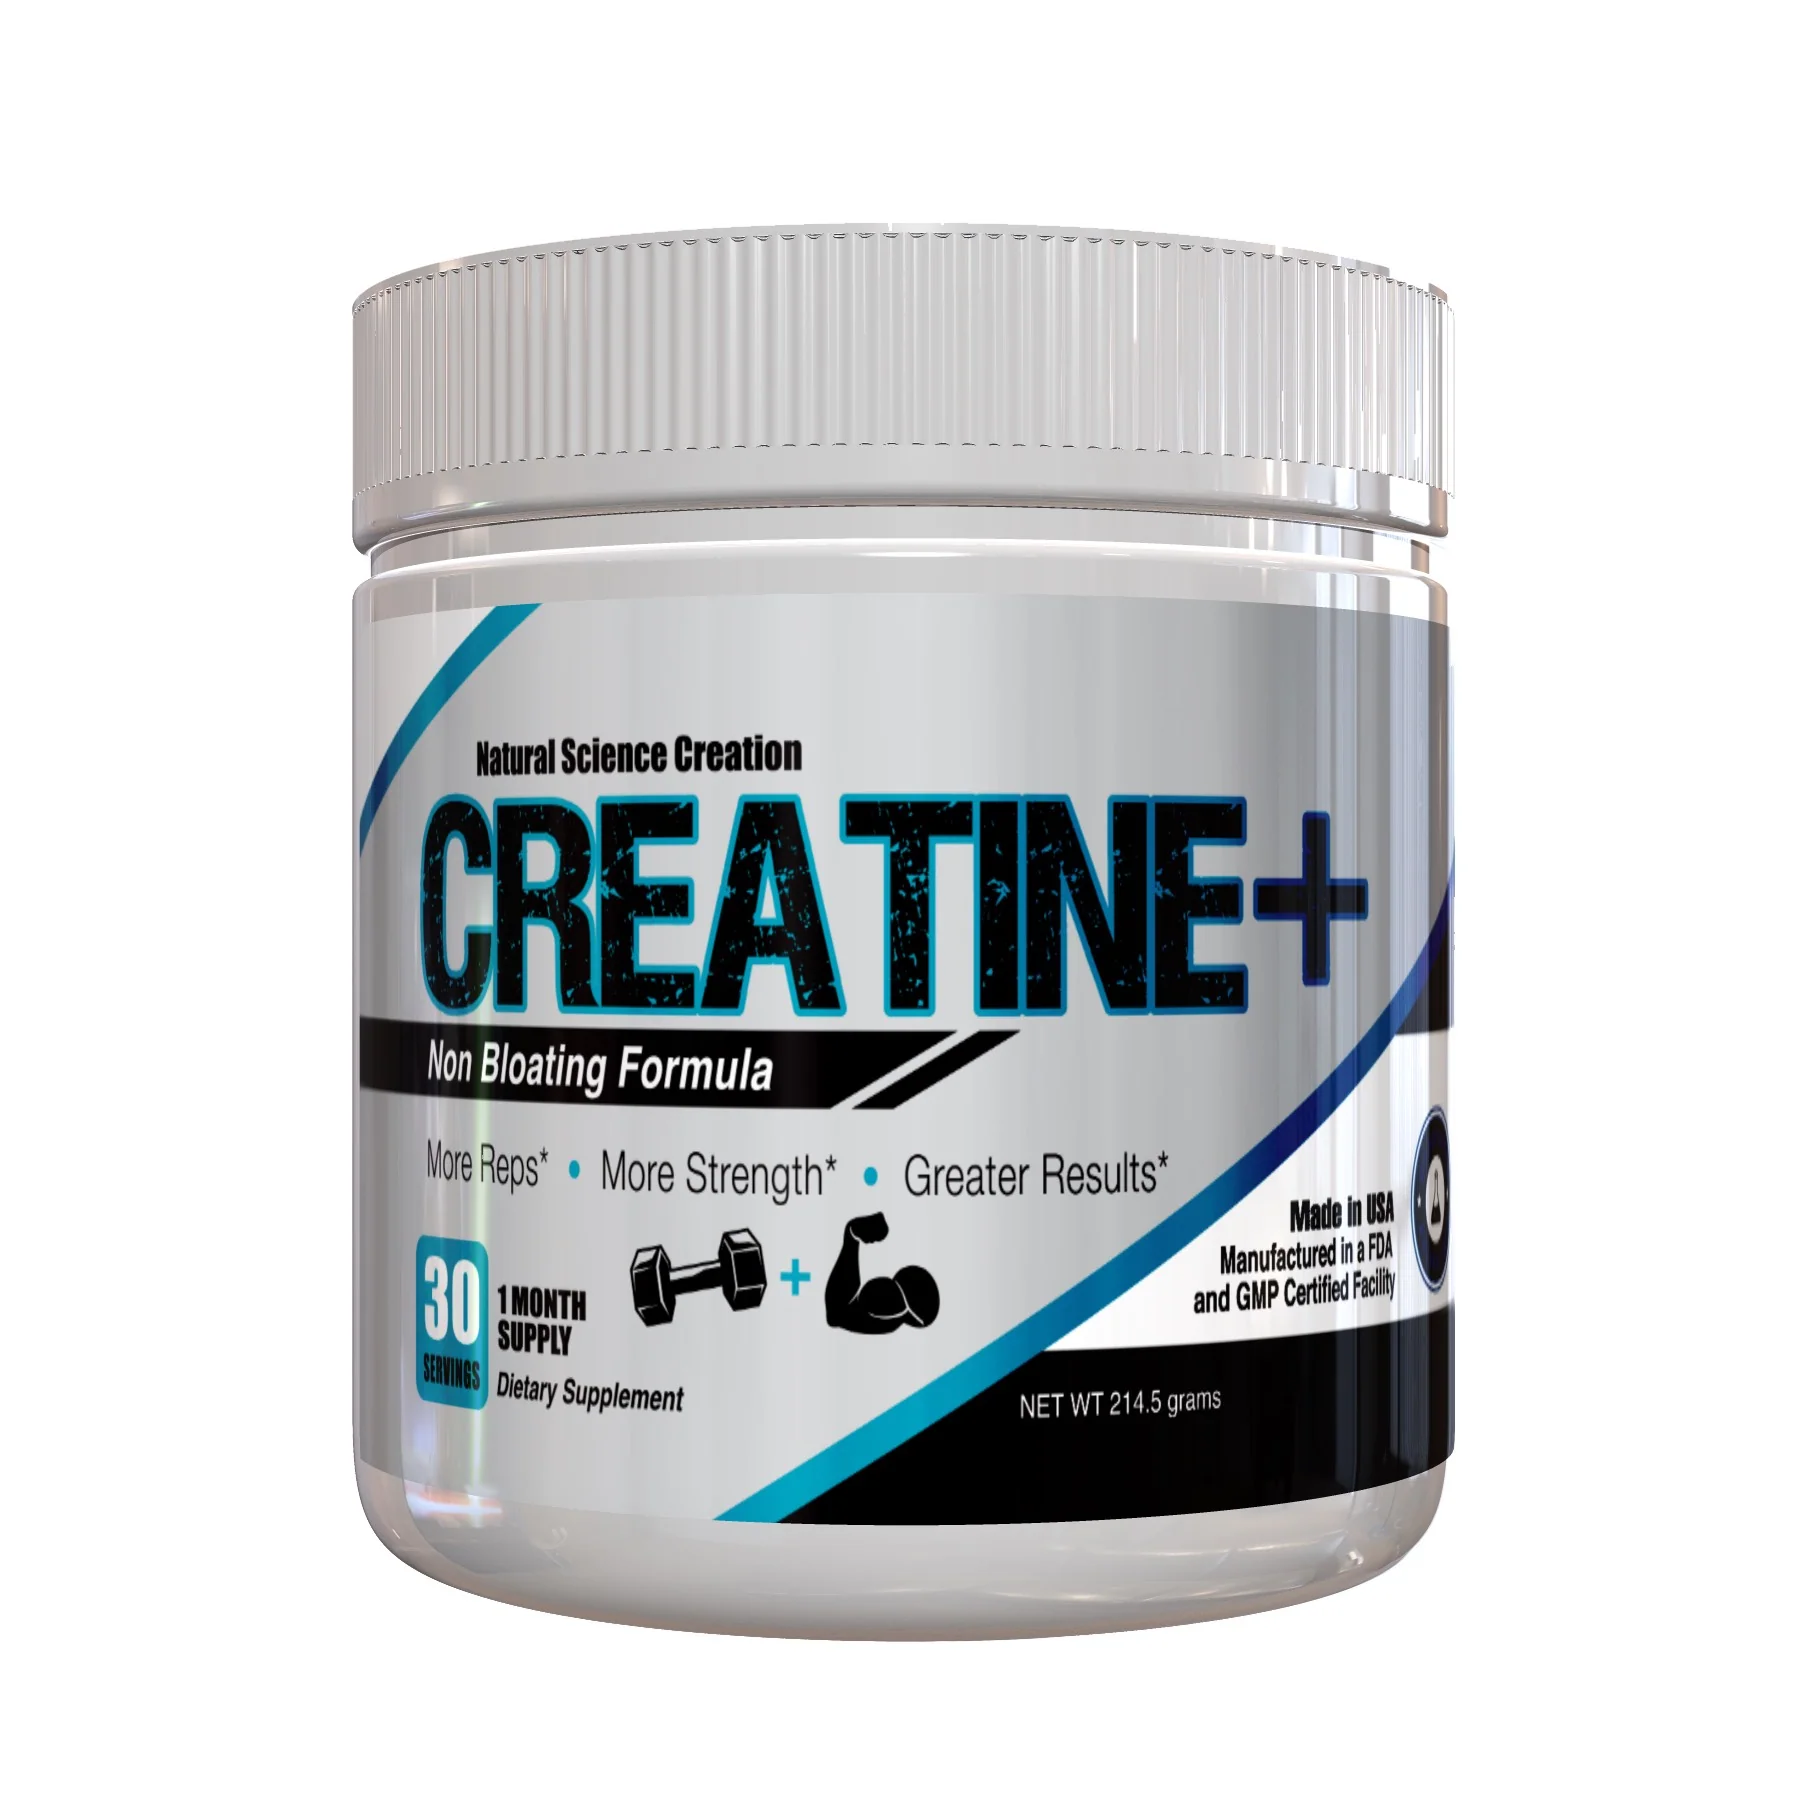 NATURAL SCIENCE CREATION CREATINE+-The Supplement Haven